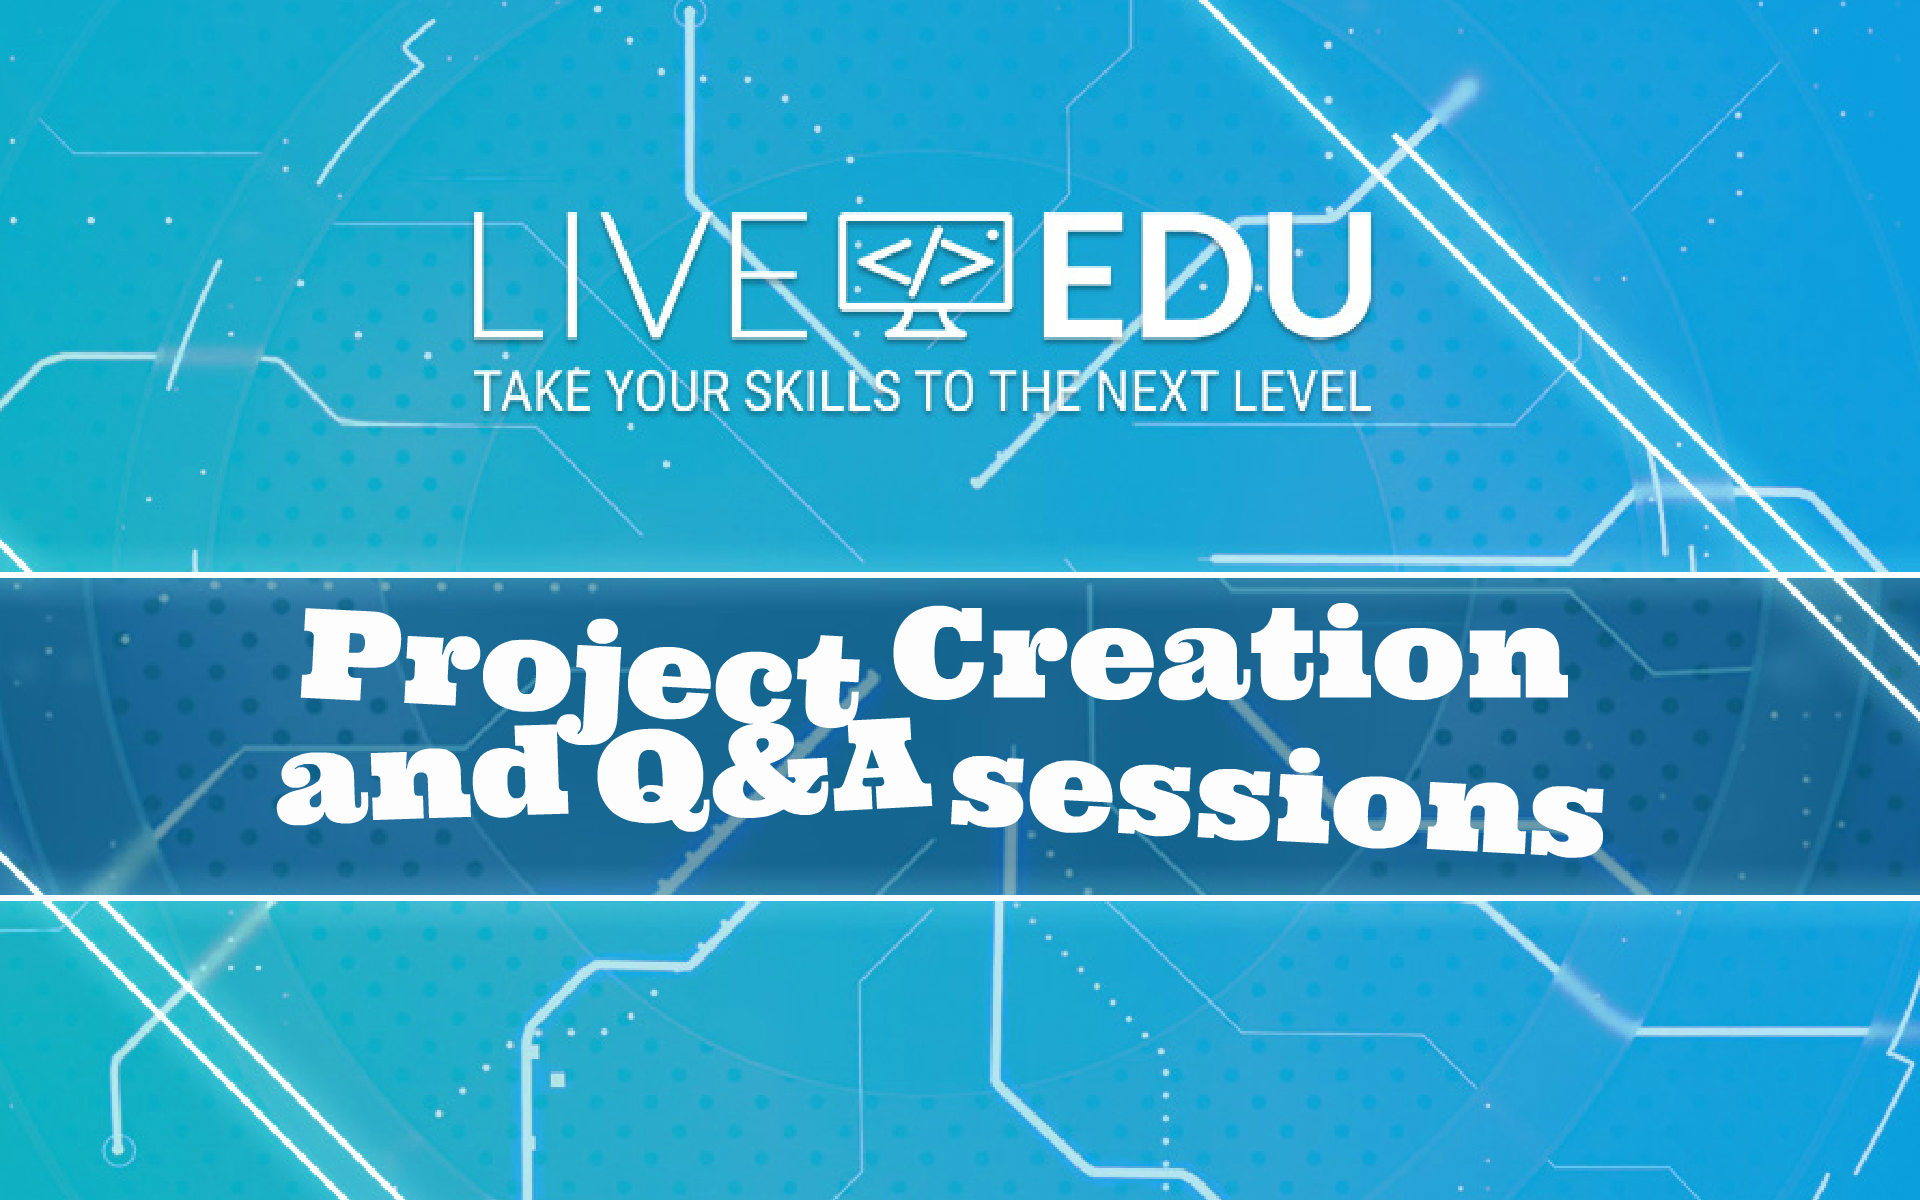 Project Creation and Q&A sessions